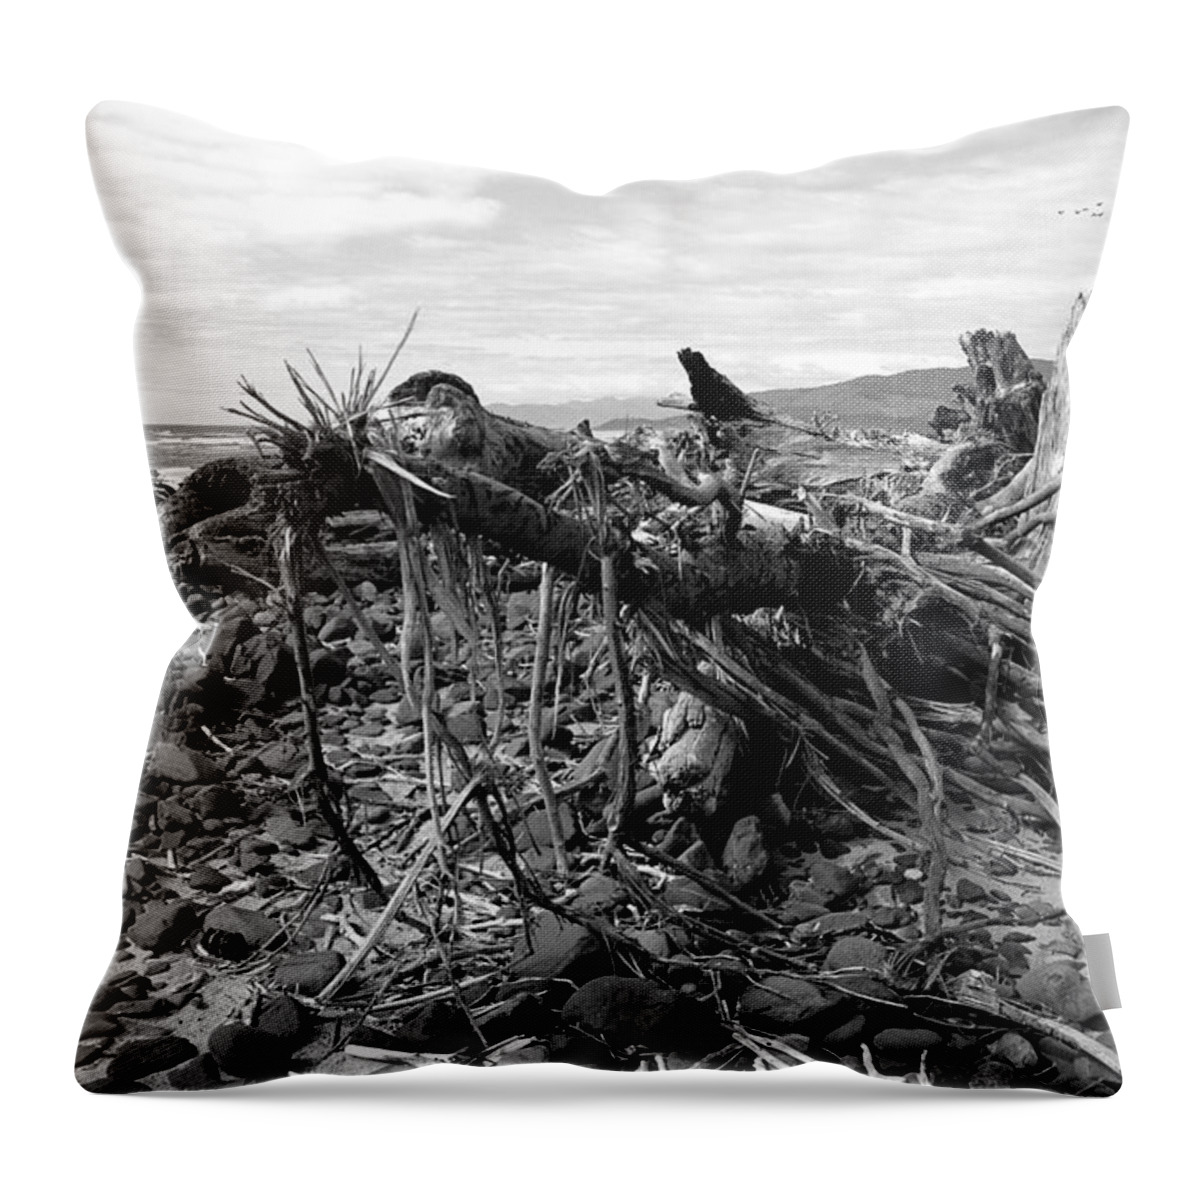 Driftwood Throw Pillow featuring the photograph Driftwood and Rocks by Chriss Pagani